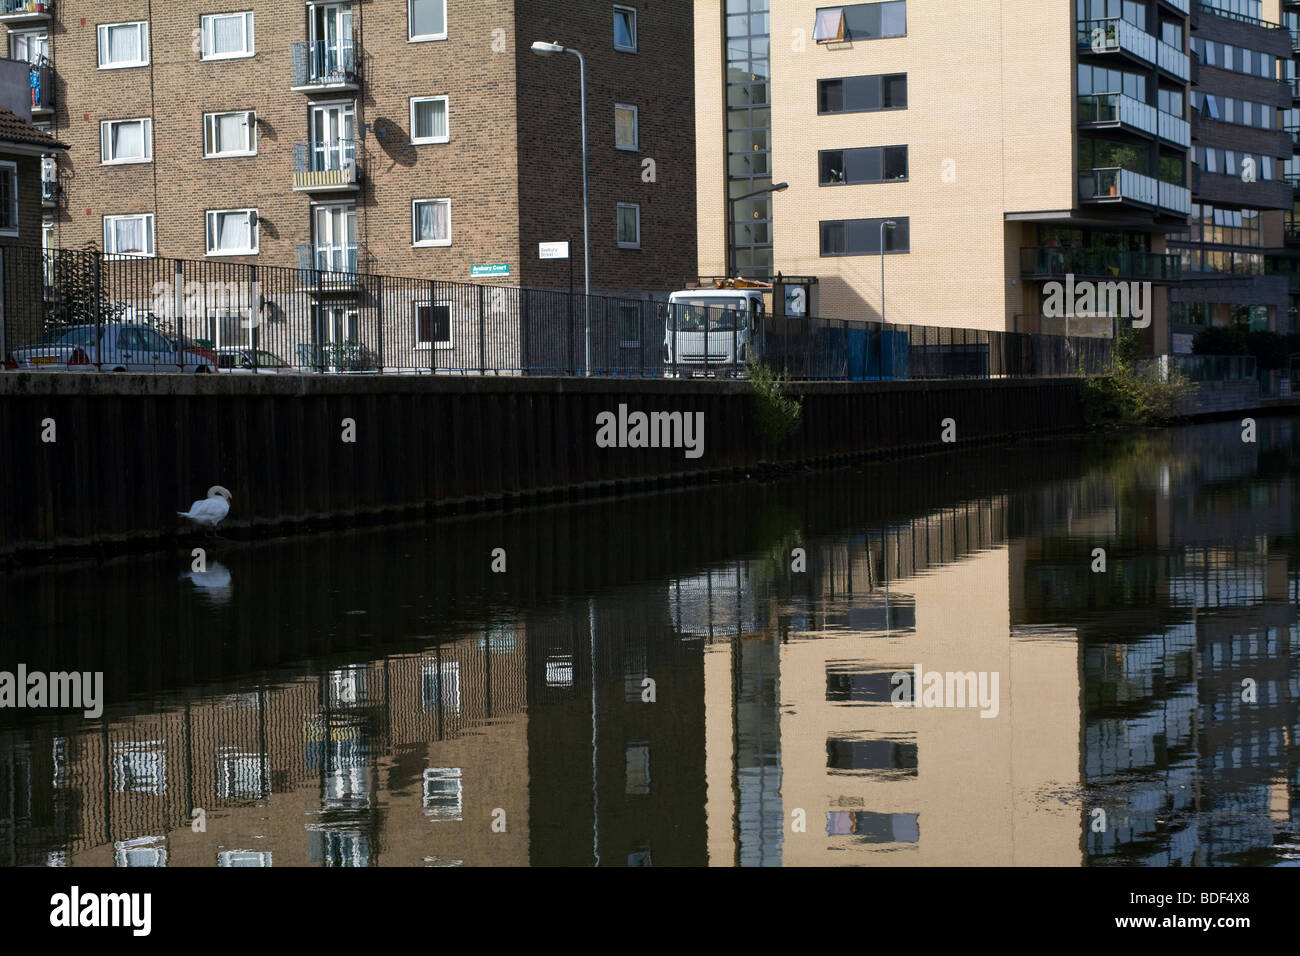 Housing Estate, a lorry, a swan, Regents Canal, London. UK Stock Photo